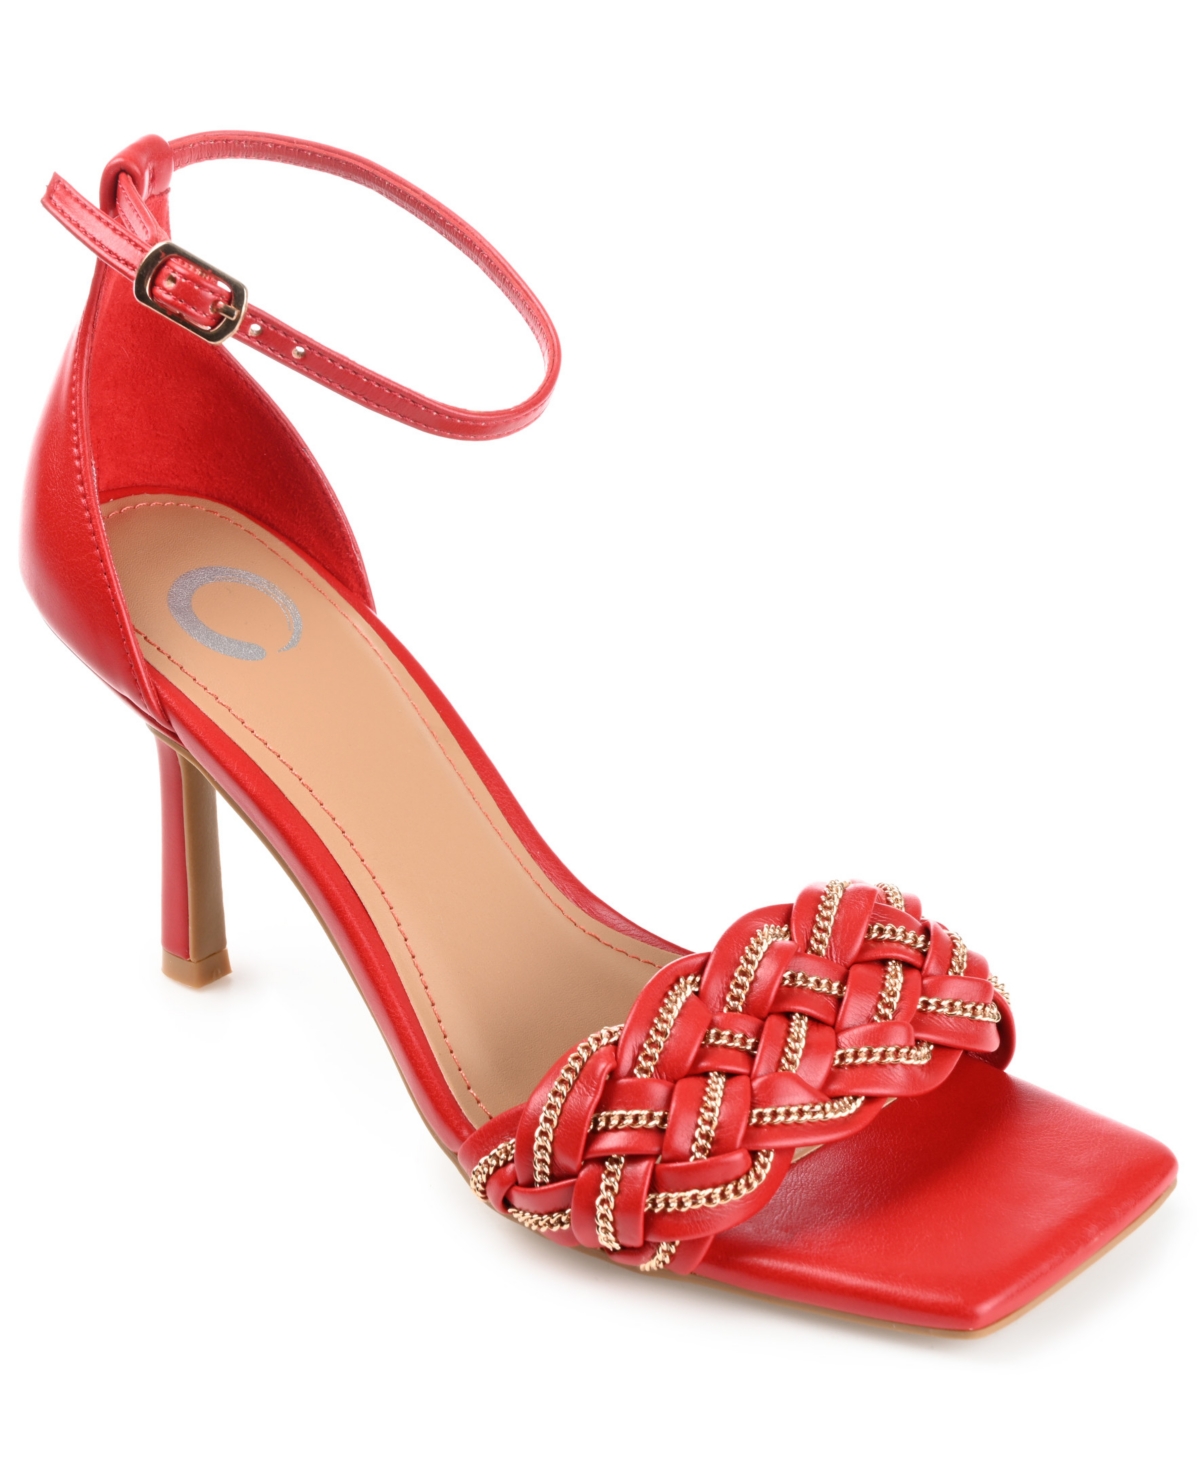 Women's Mabella Braided Chain Sandals - Red